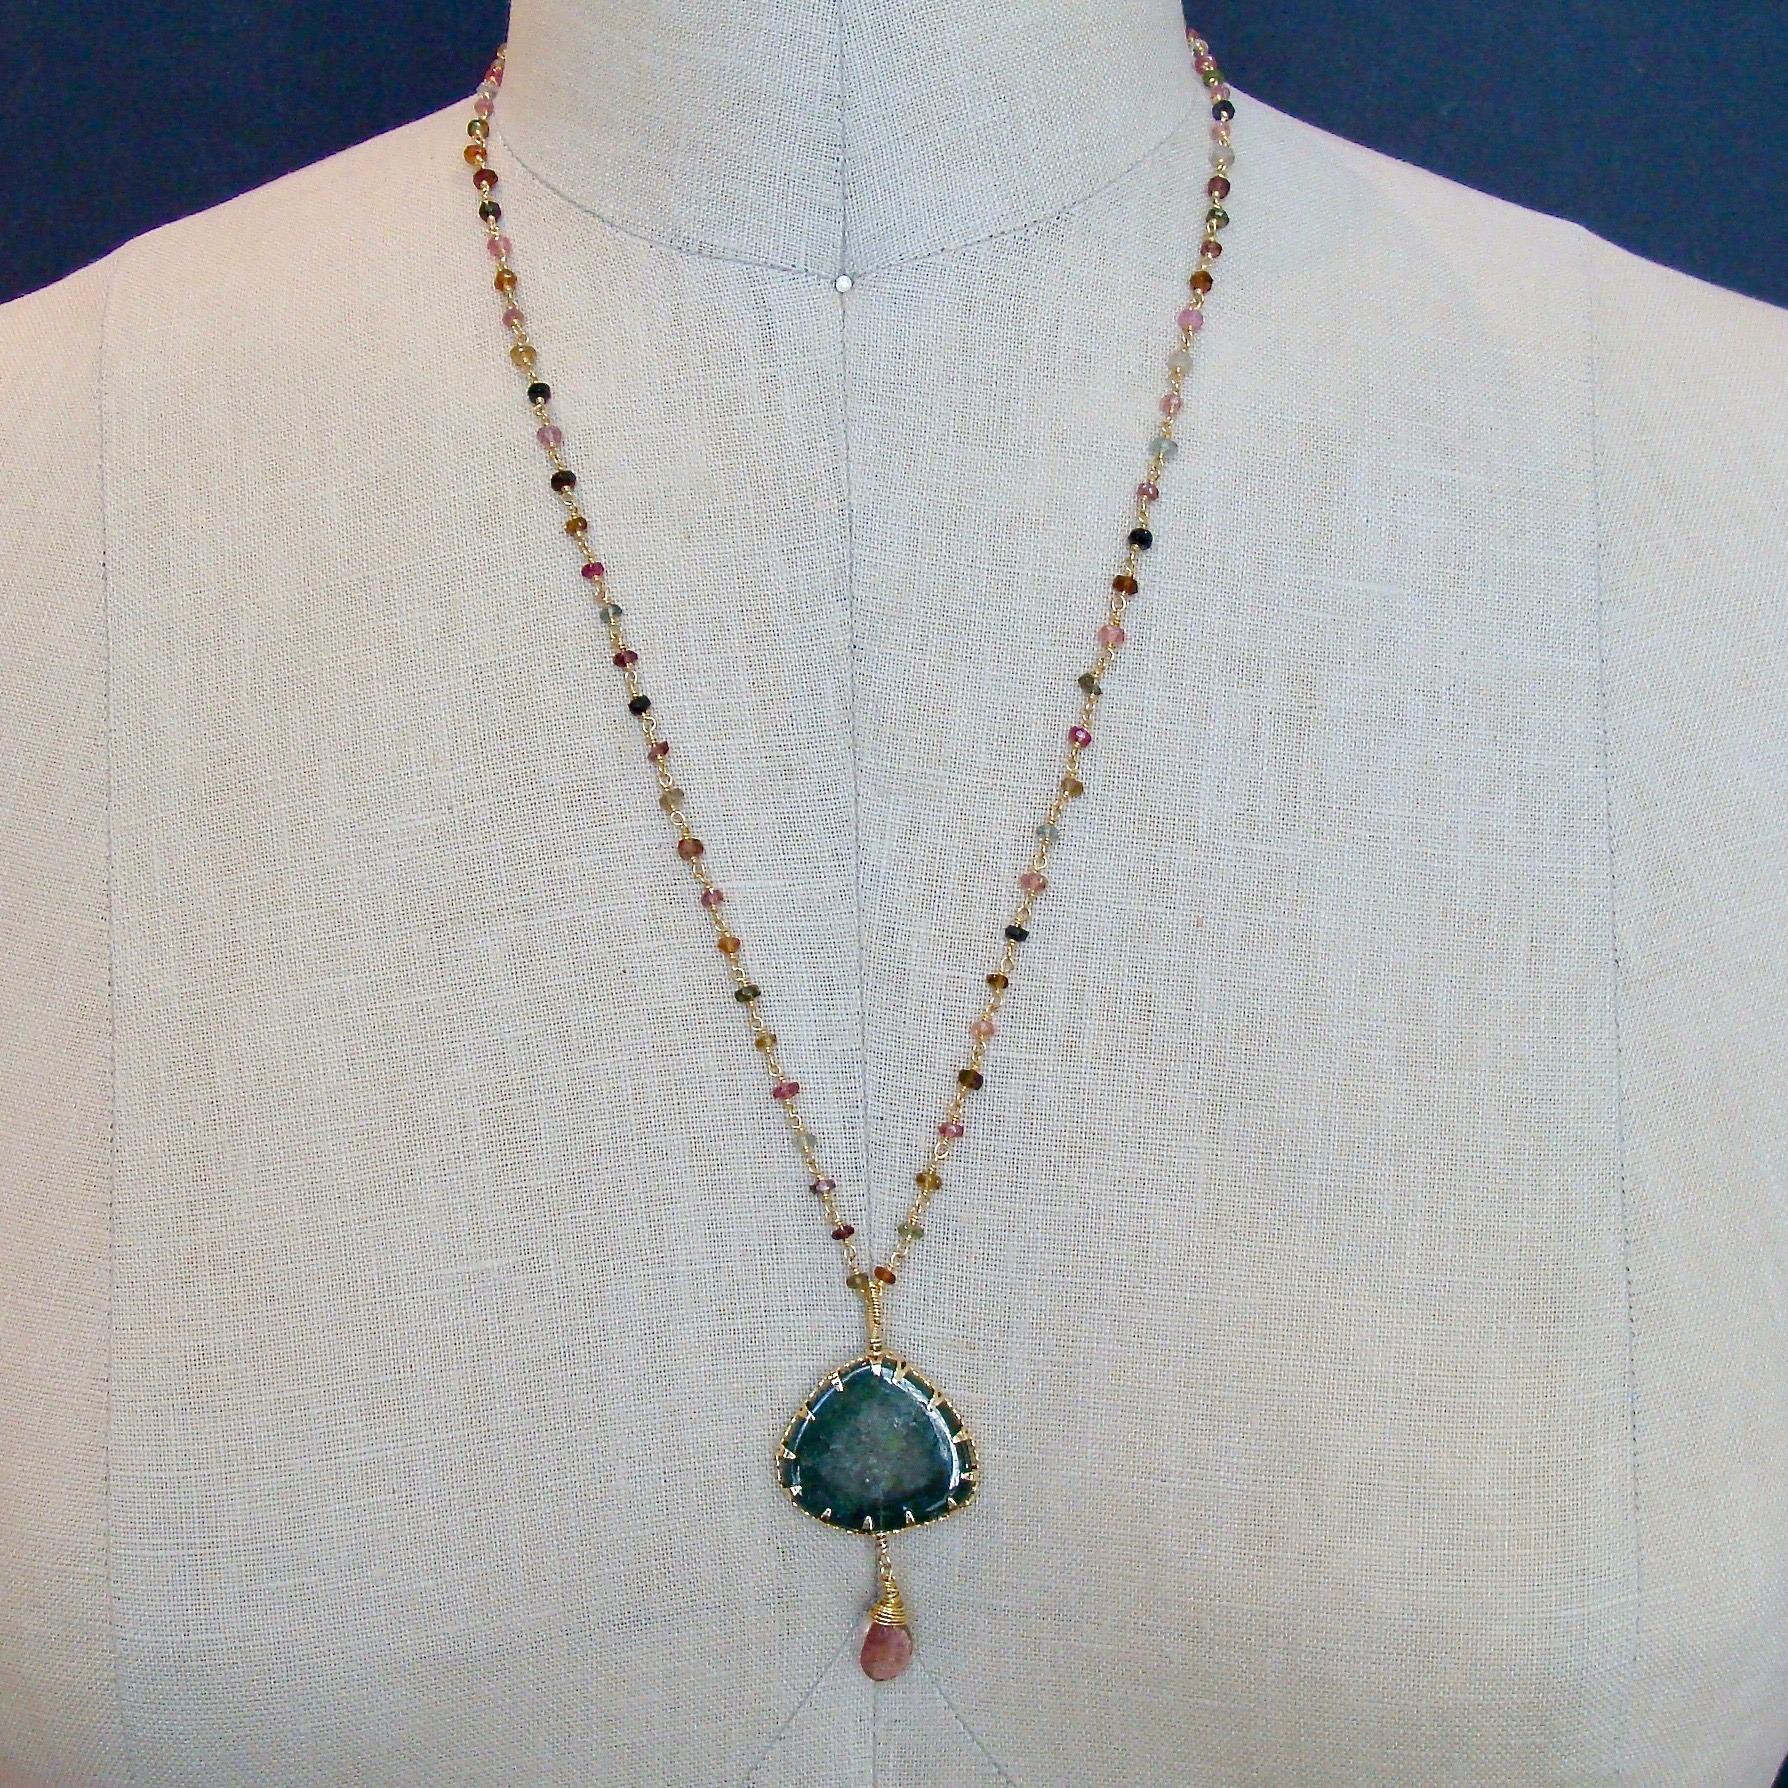 Artisan Green Tourmaline Slice with Hand Linked Tourmaline Chain, Laurel Necklace For Sale